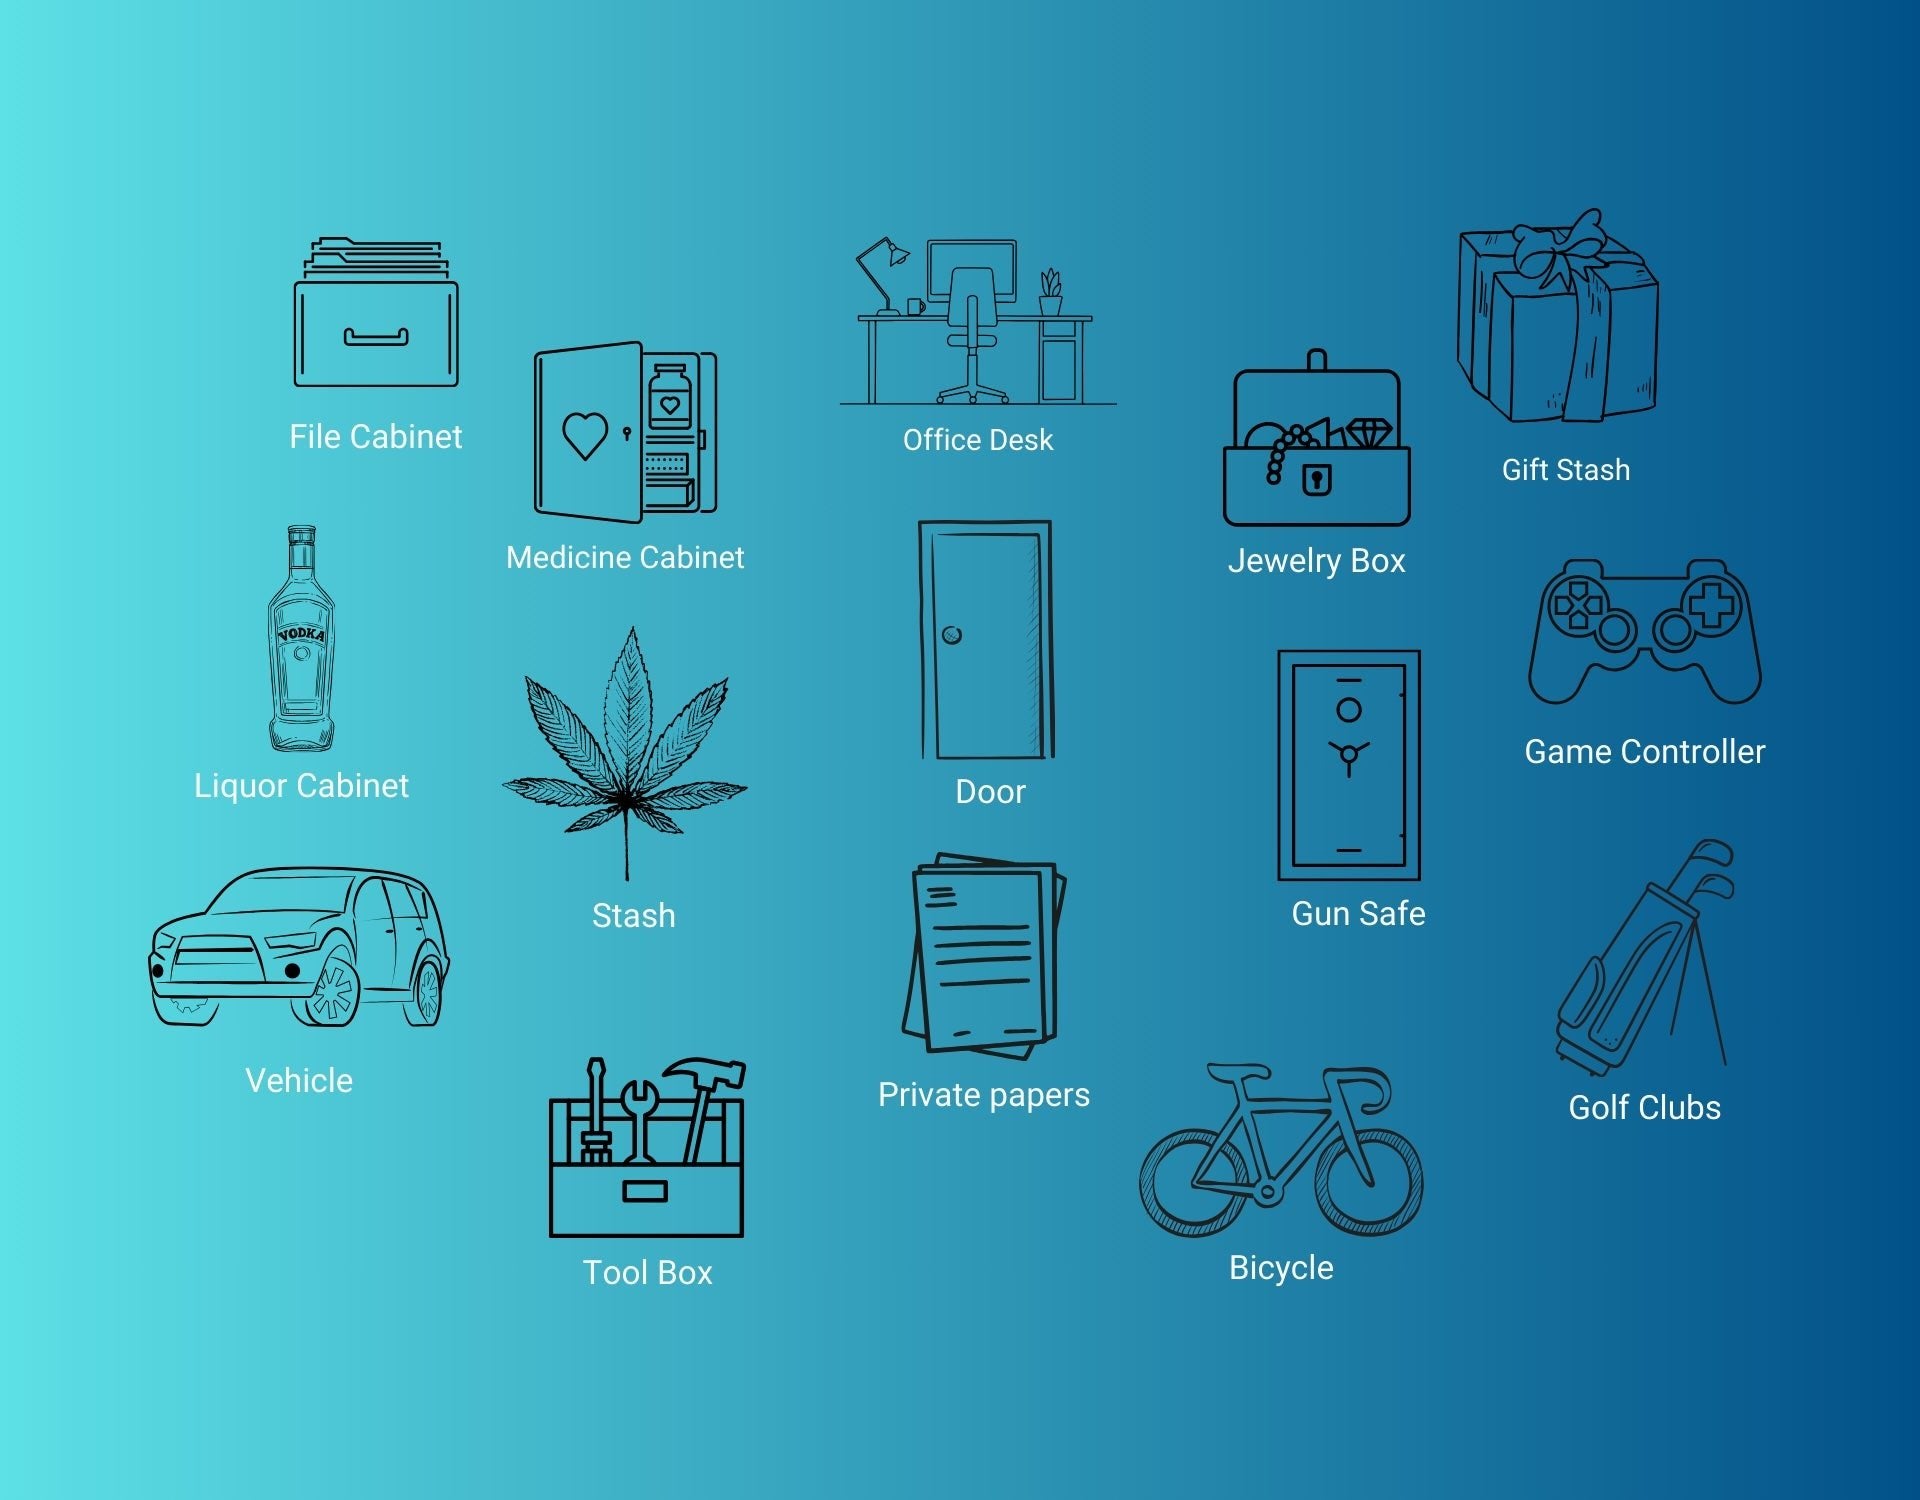 Graphic of the many place to use Kini Wireless Motion Sensor- File Cabinet, Medicine Cabinet, Office Desk, Jewelry Box, Gift Stash, Liquor Cabinet, Cannabis, Door, Game Controller, Vehicle, Tool Box, Private Papers, Bicycle, Golf ClubsKini Single Pack: Wireless Motion Sensor with Realtime SMS Alerts - Kinisium LLC